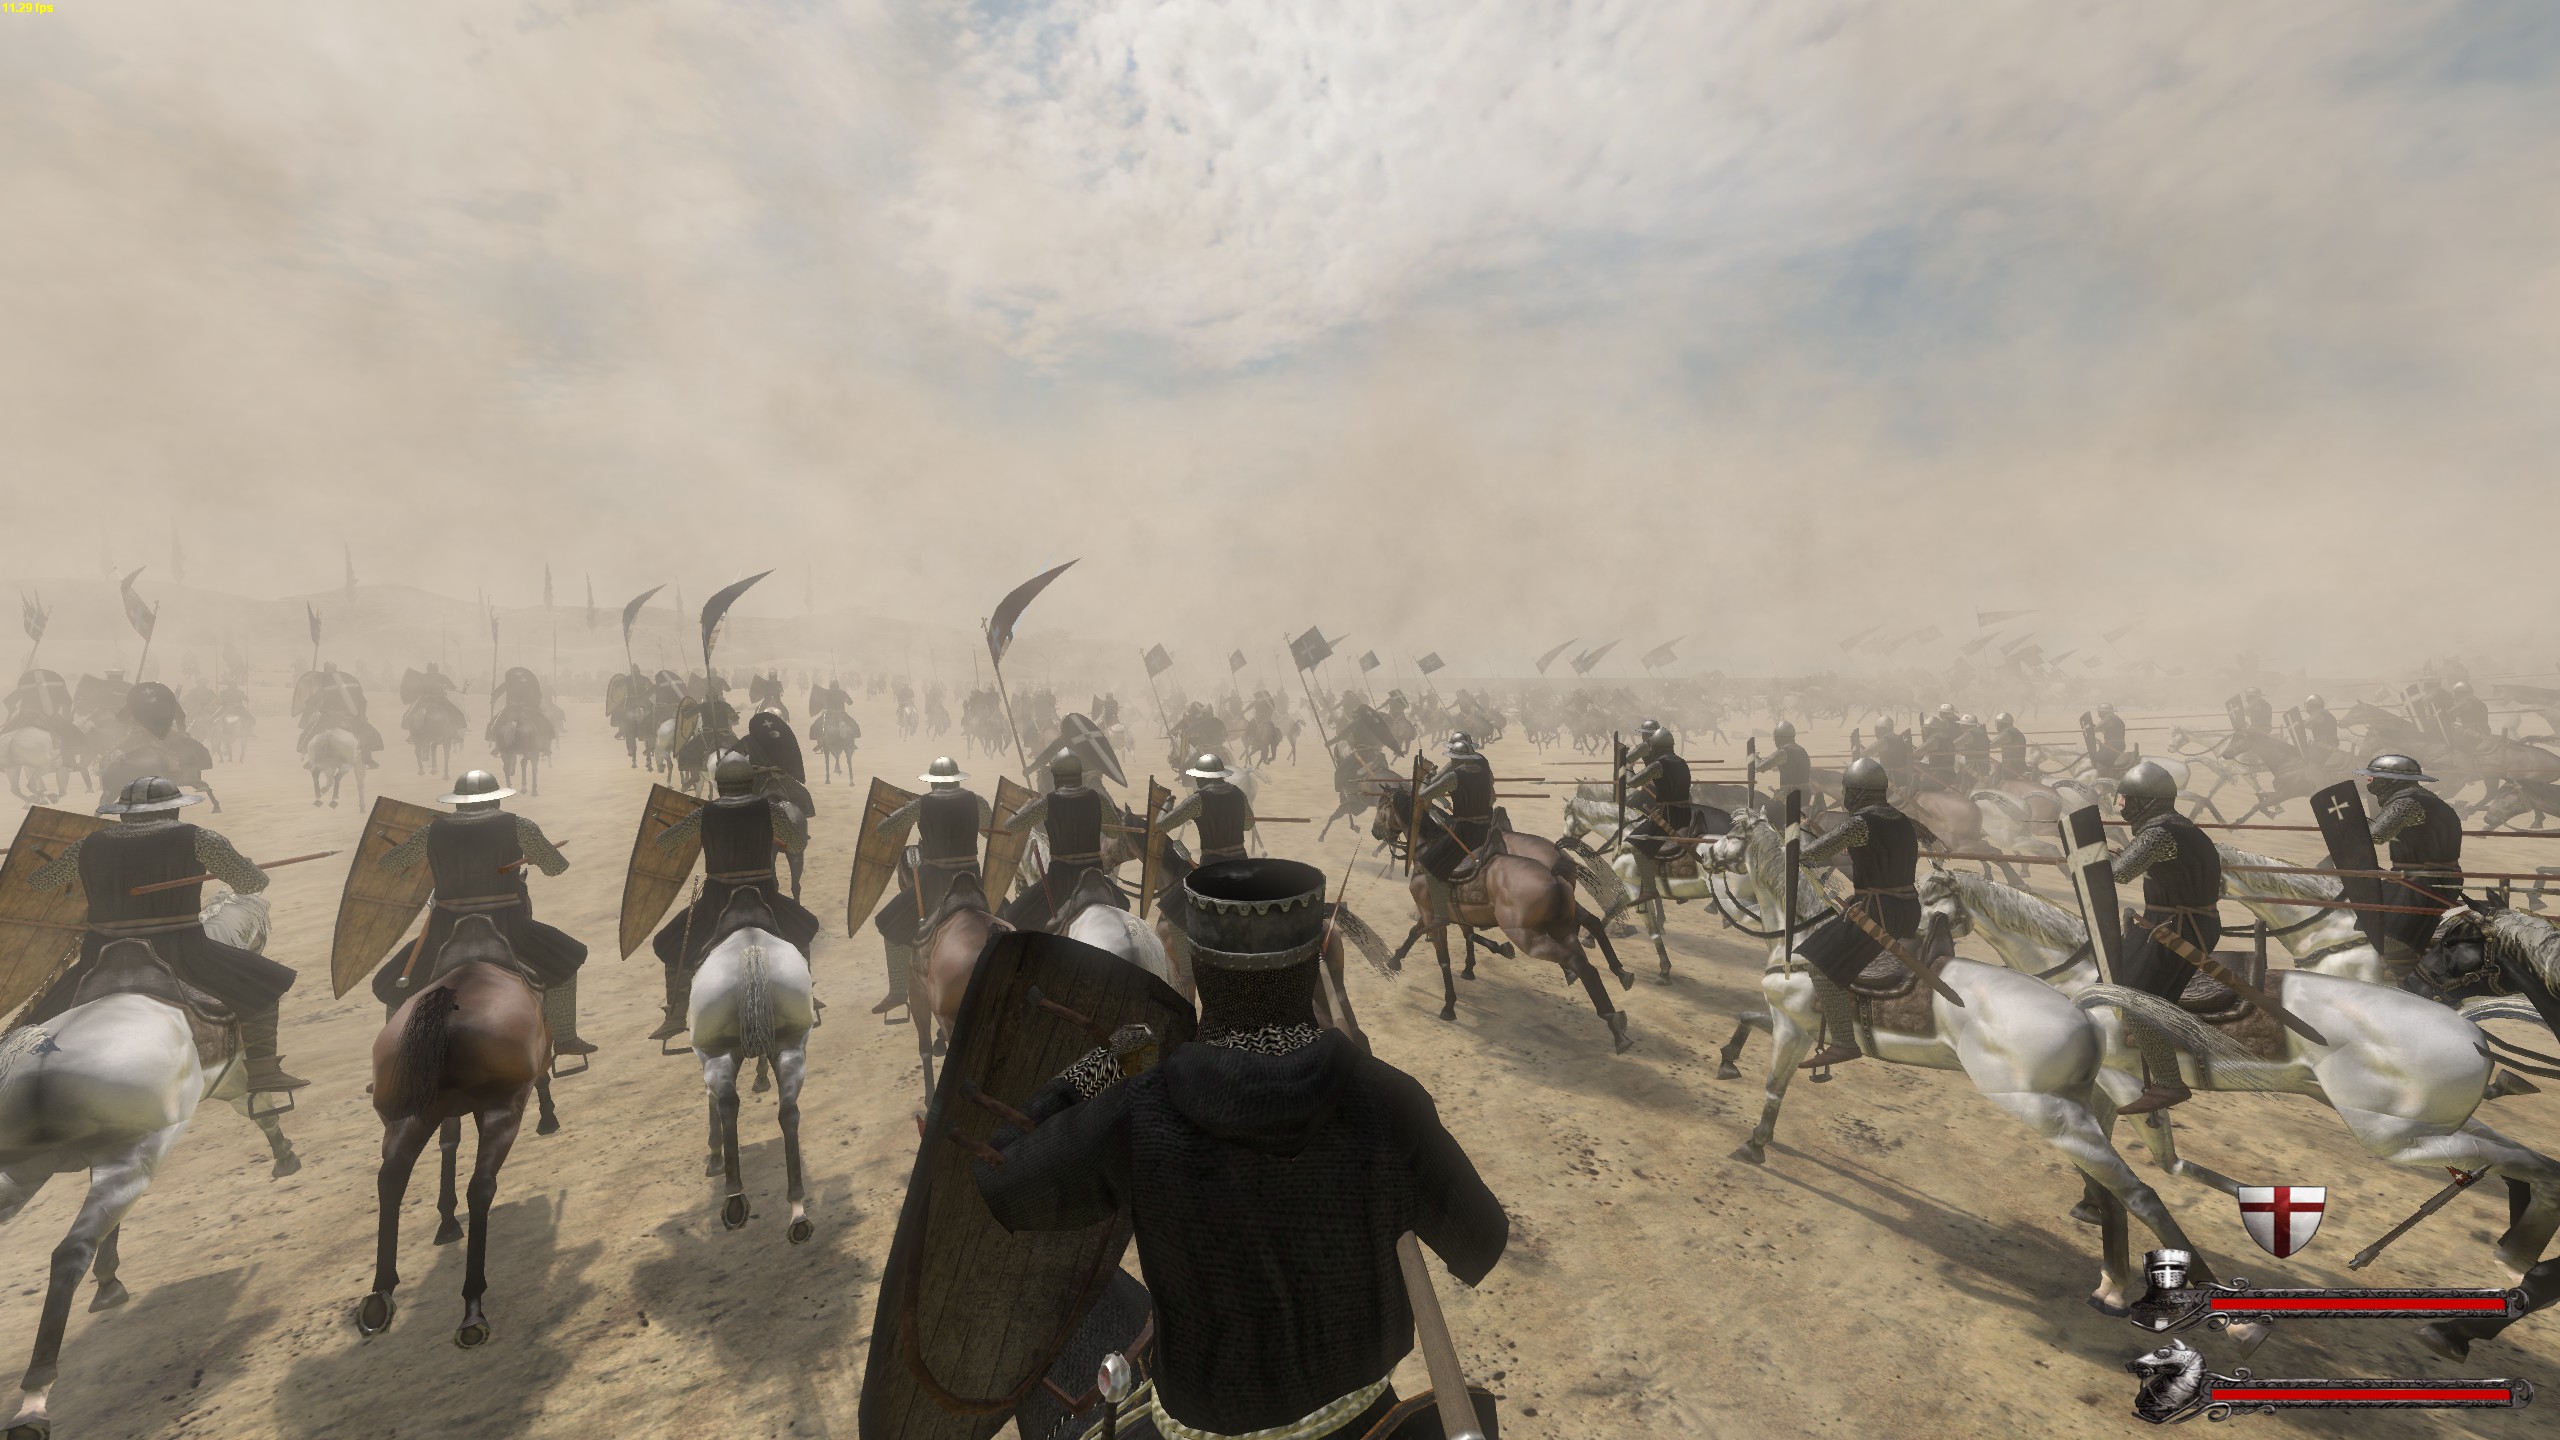 mount and blade warband 1.172 to 1.174 patch download